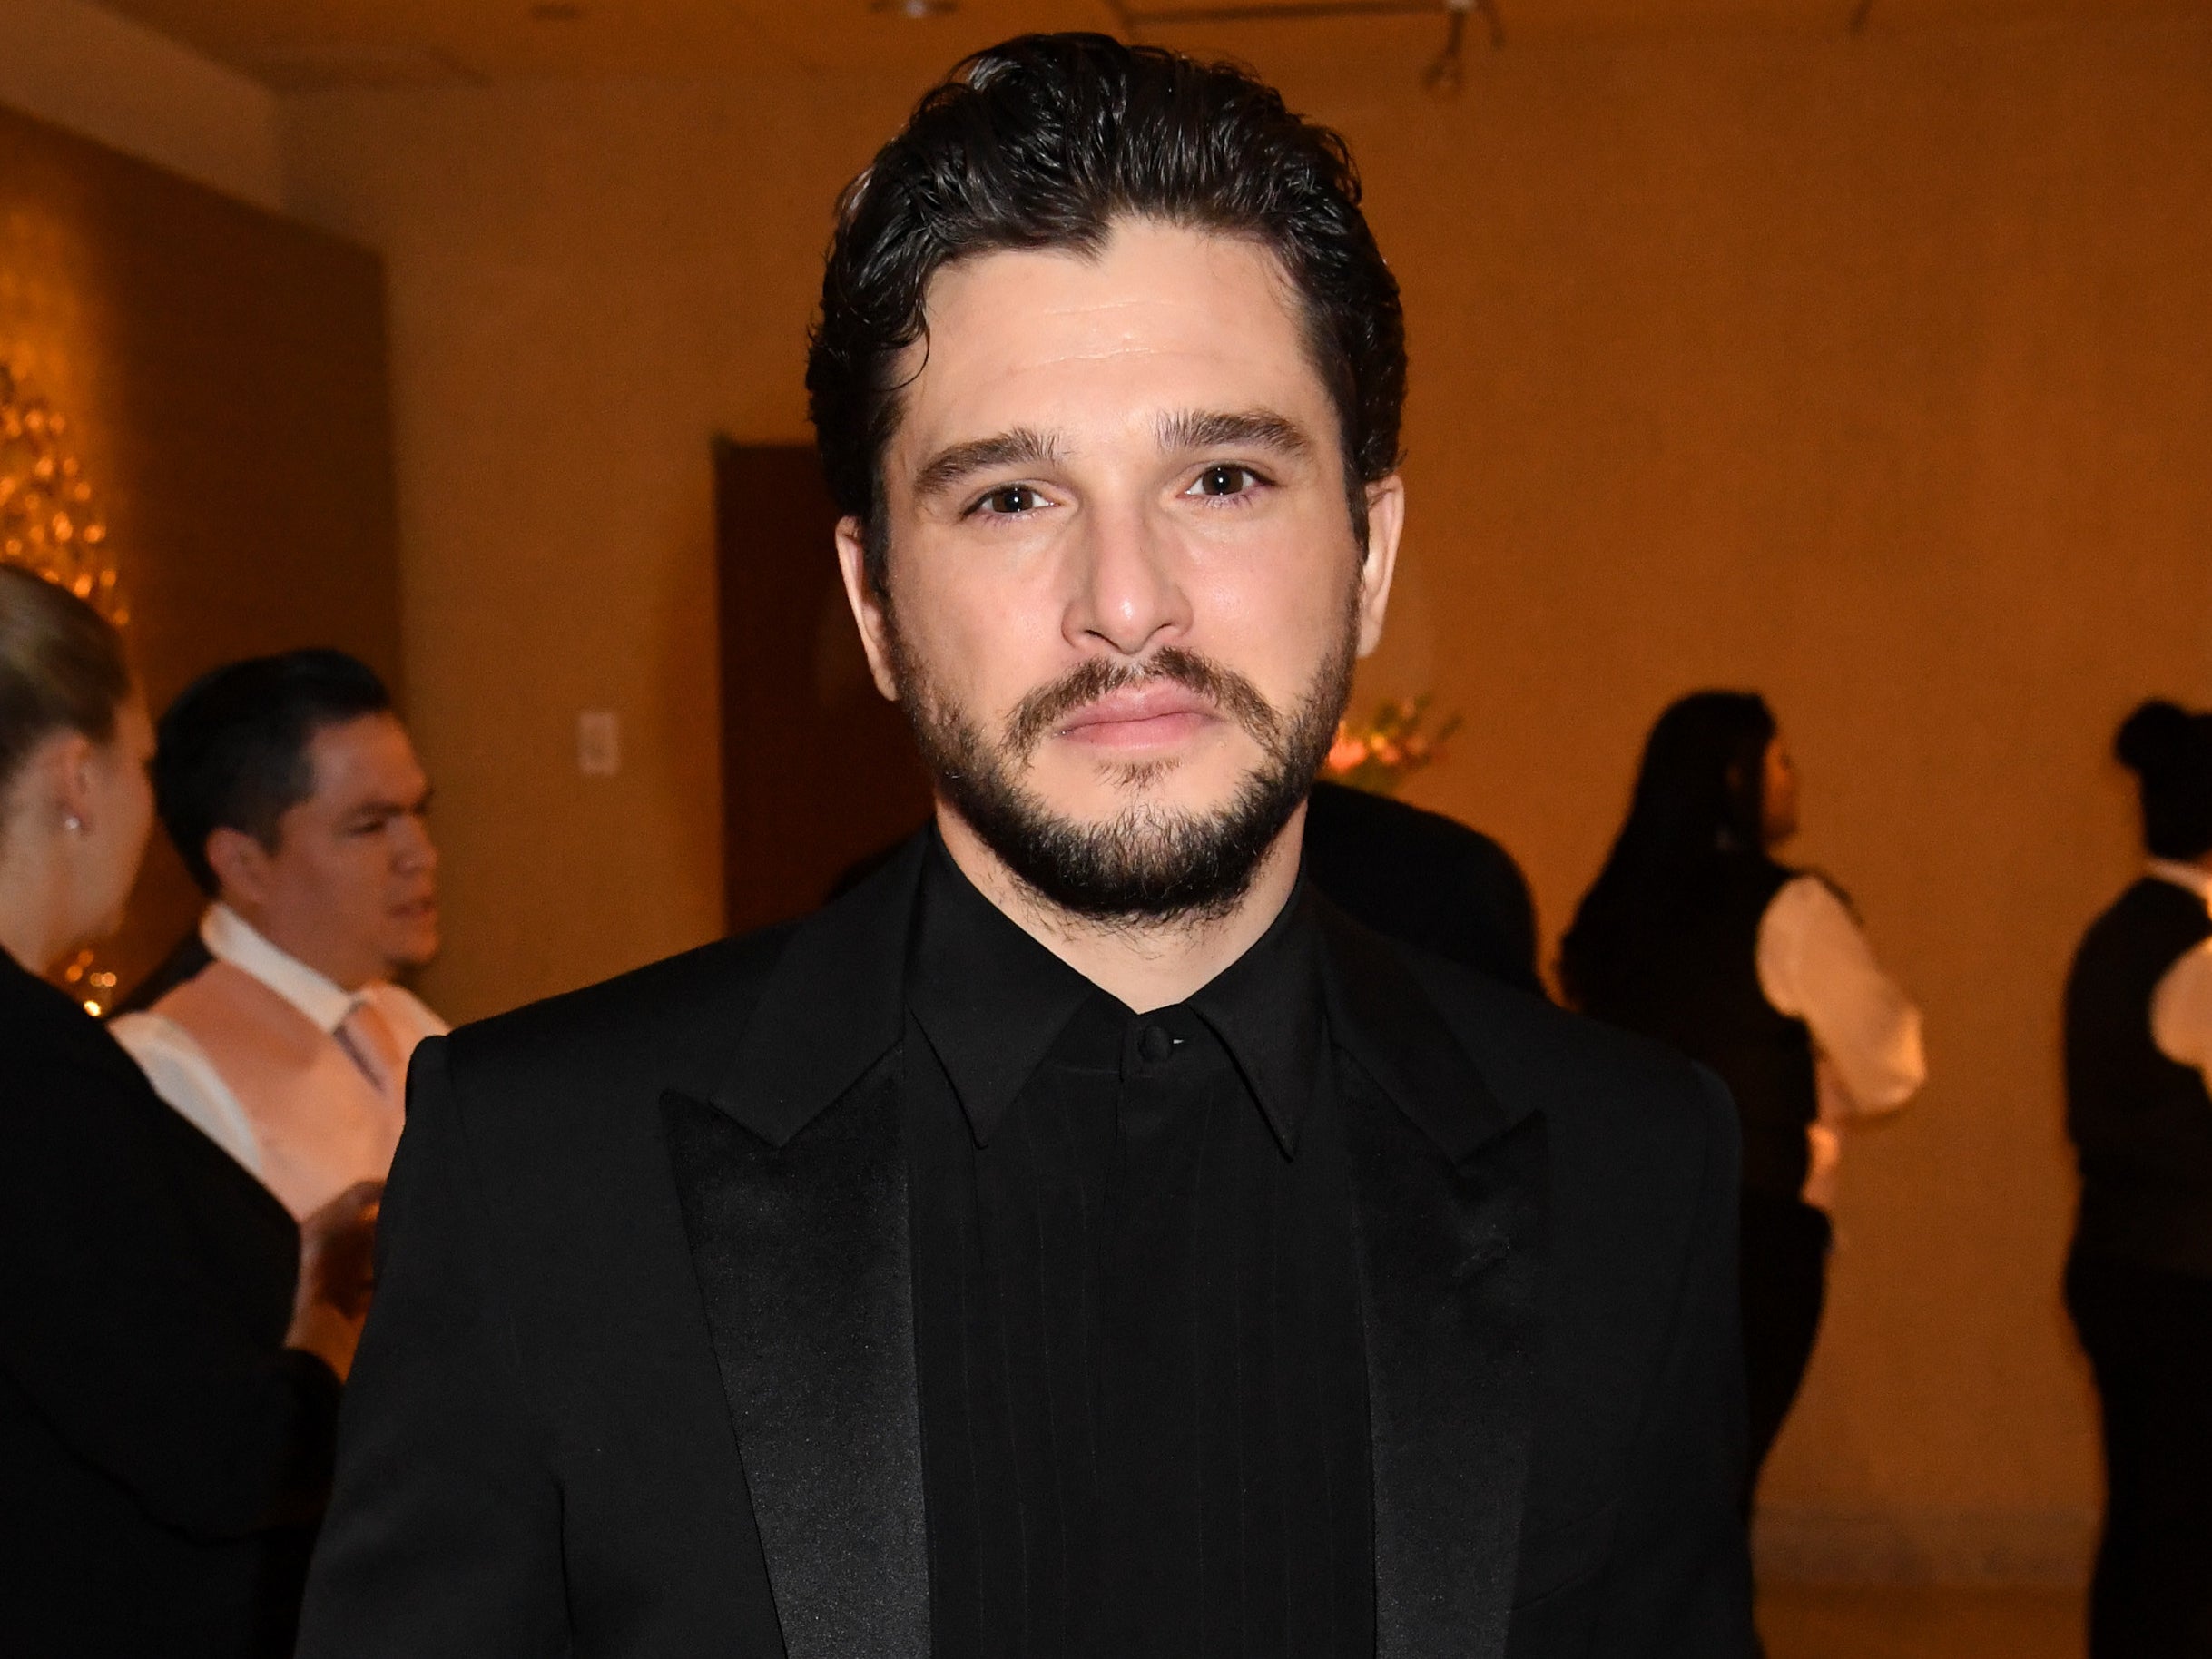 Kit wears a black suit jacket and black shirt at an event